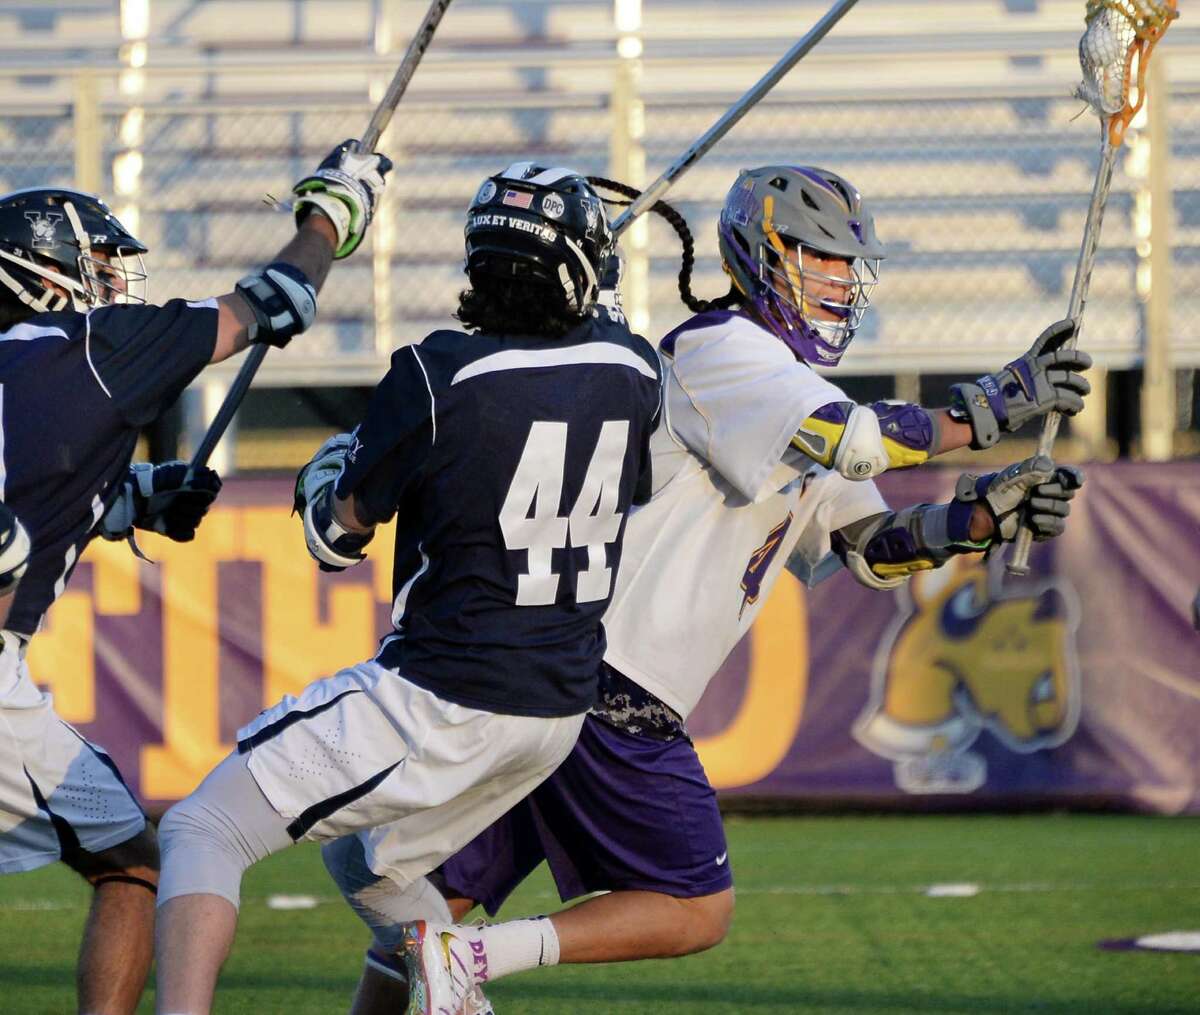 UAlbany's #4 Lyle Thompson, right, drives through Yale defenders to score during Saturday's lacrosse game April 18, 2015 in Albany, NY. (John Carl D'Annibale / Times Union)